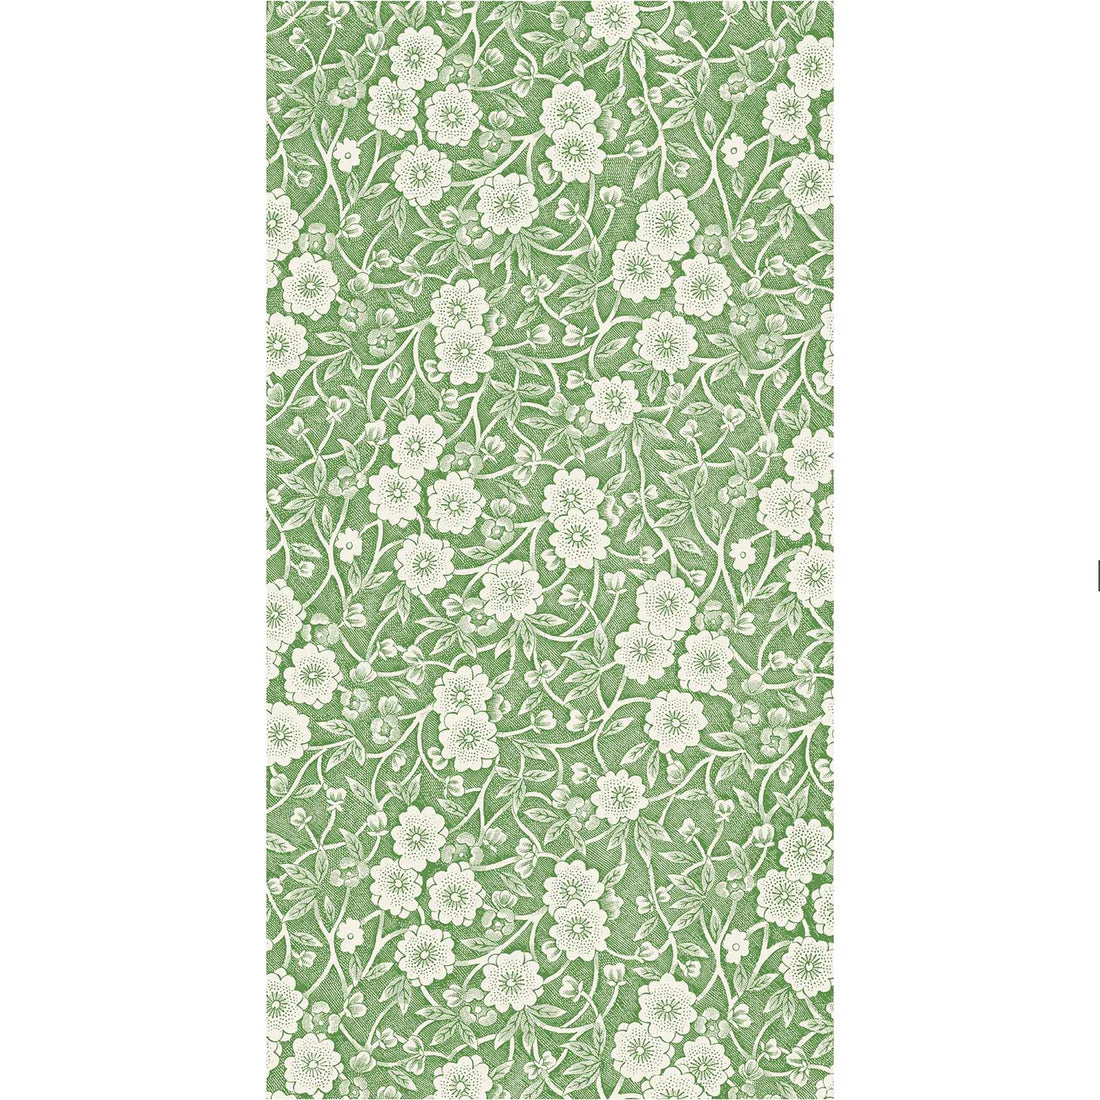 Hester & Cook Green Calico Guest Towels paper napkins 